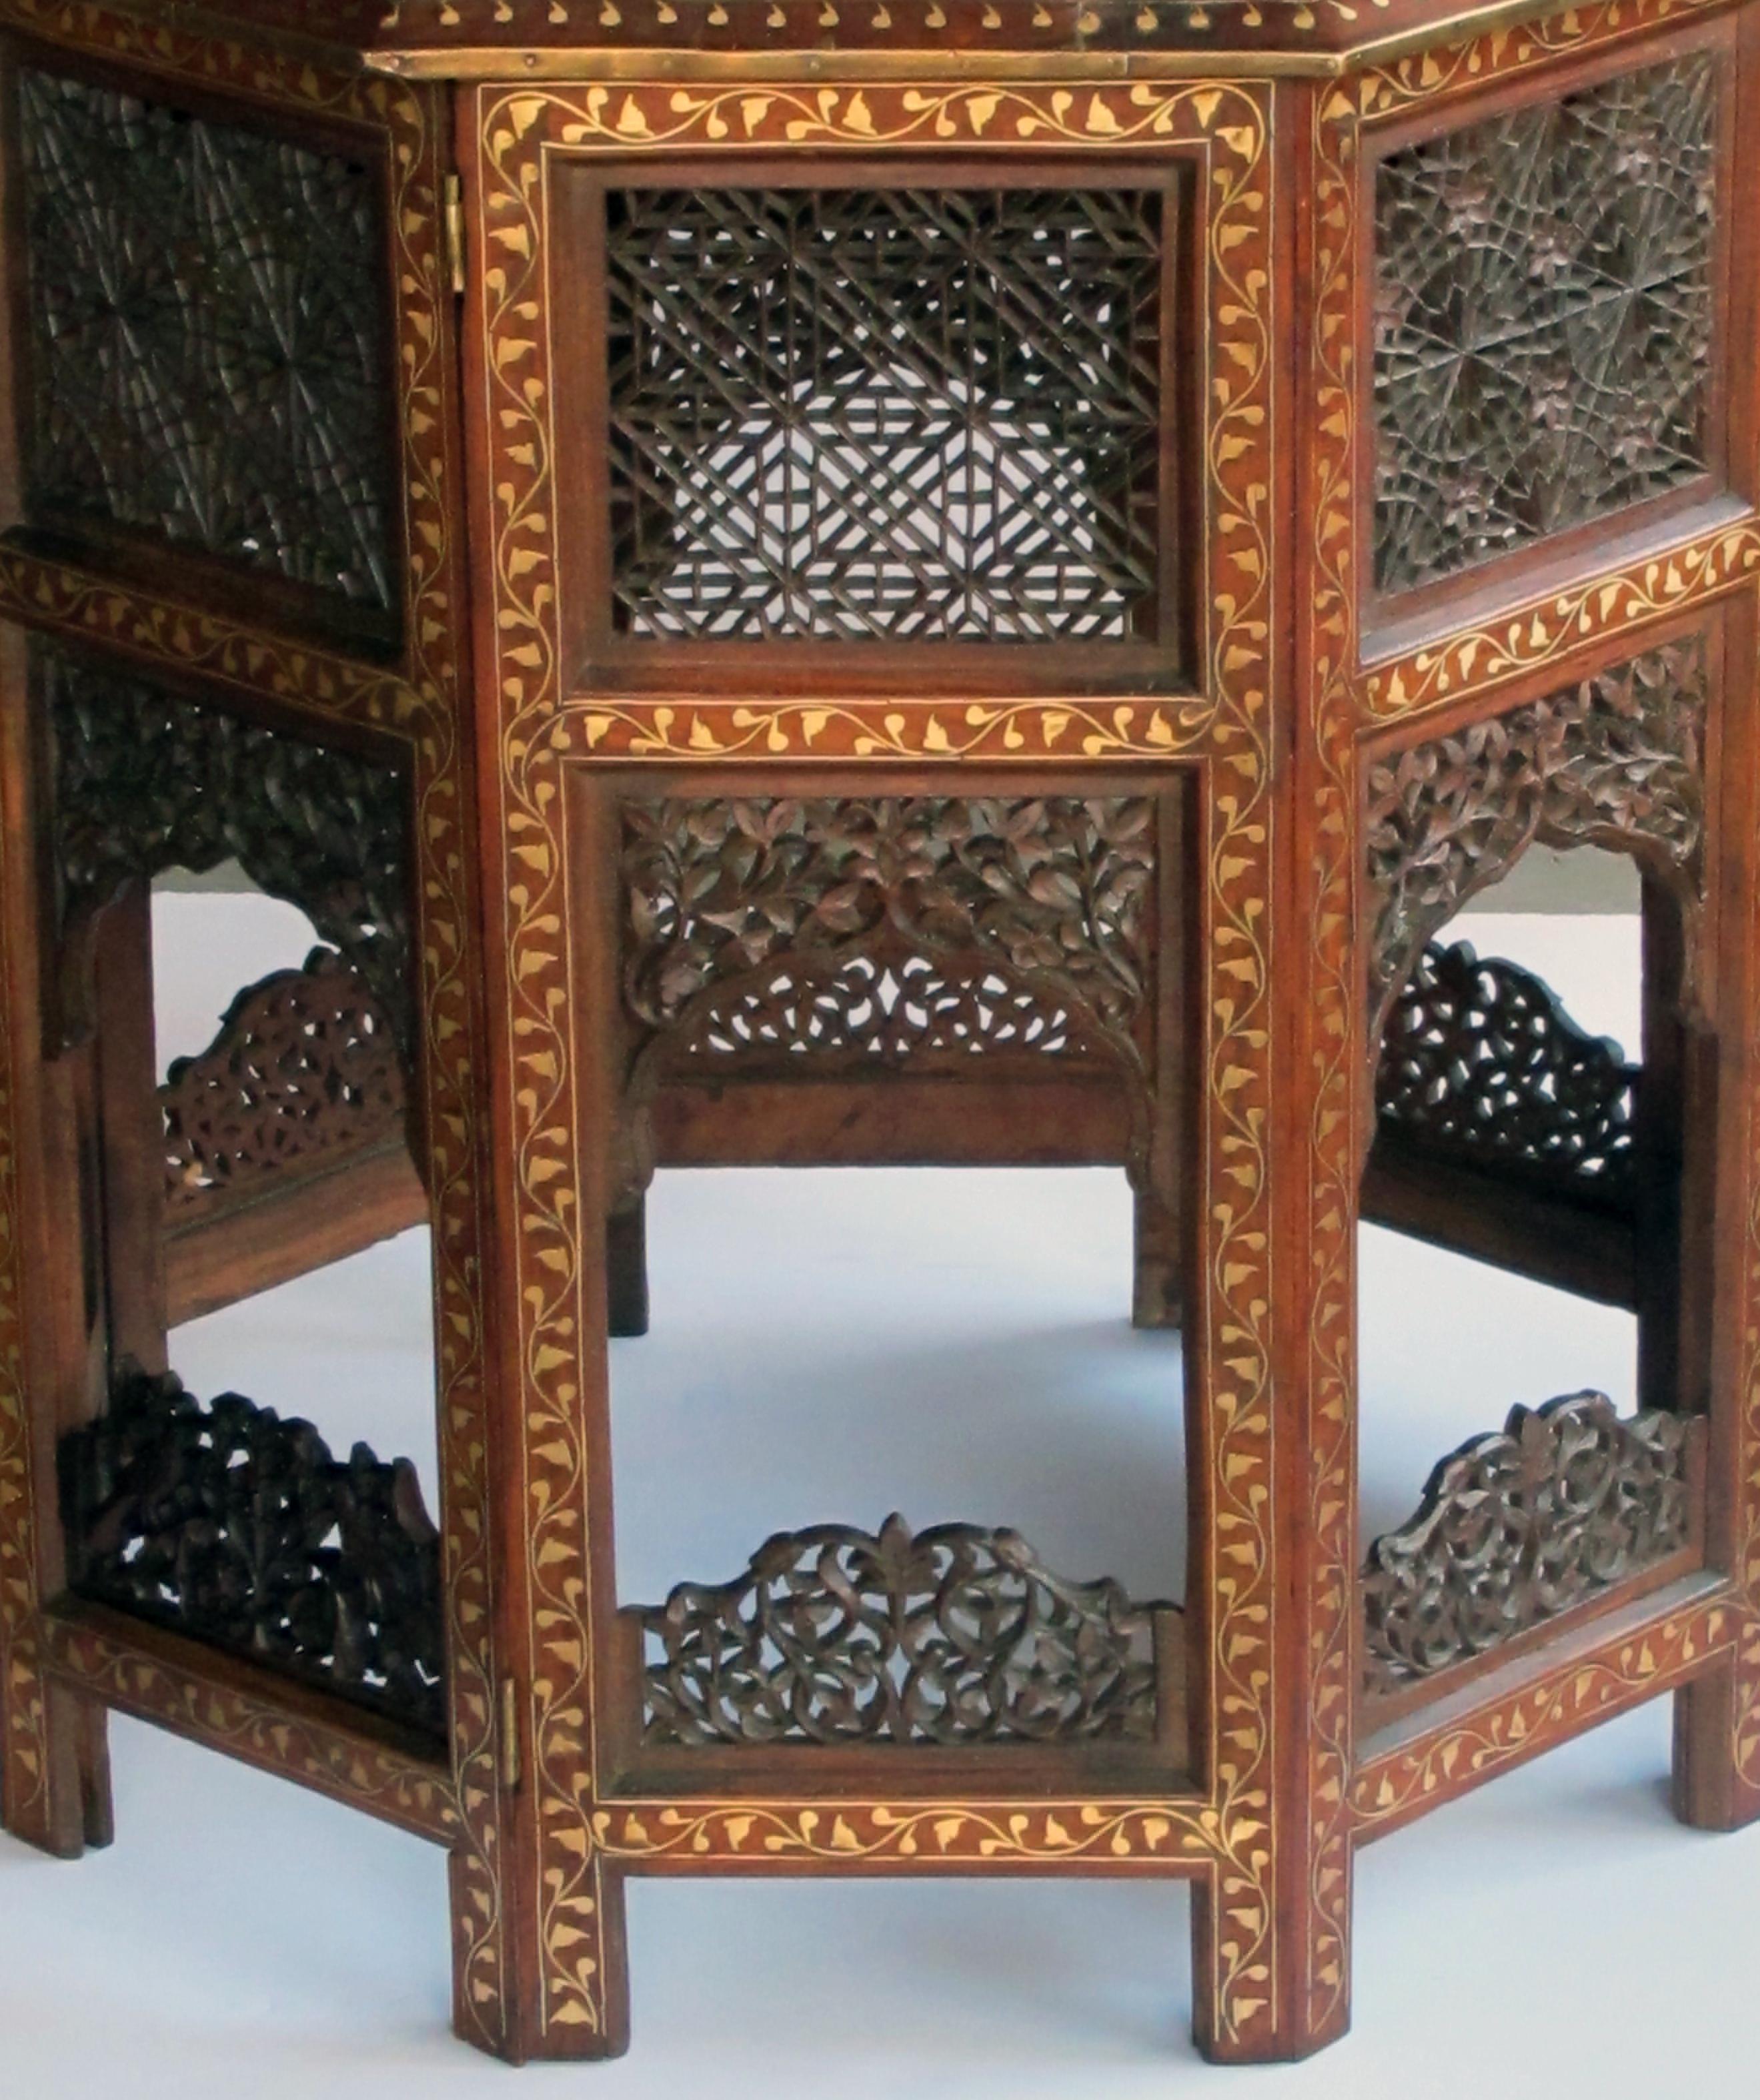 British Indian Ocean Territory Large and Intricately Inlaid Anglo Indian Octagonal Side Table with Brass Inlay